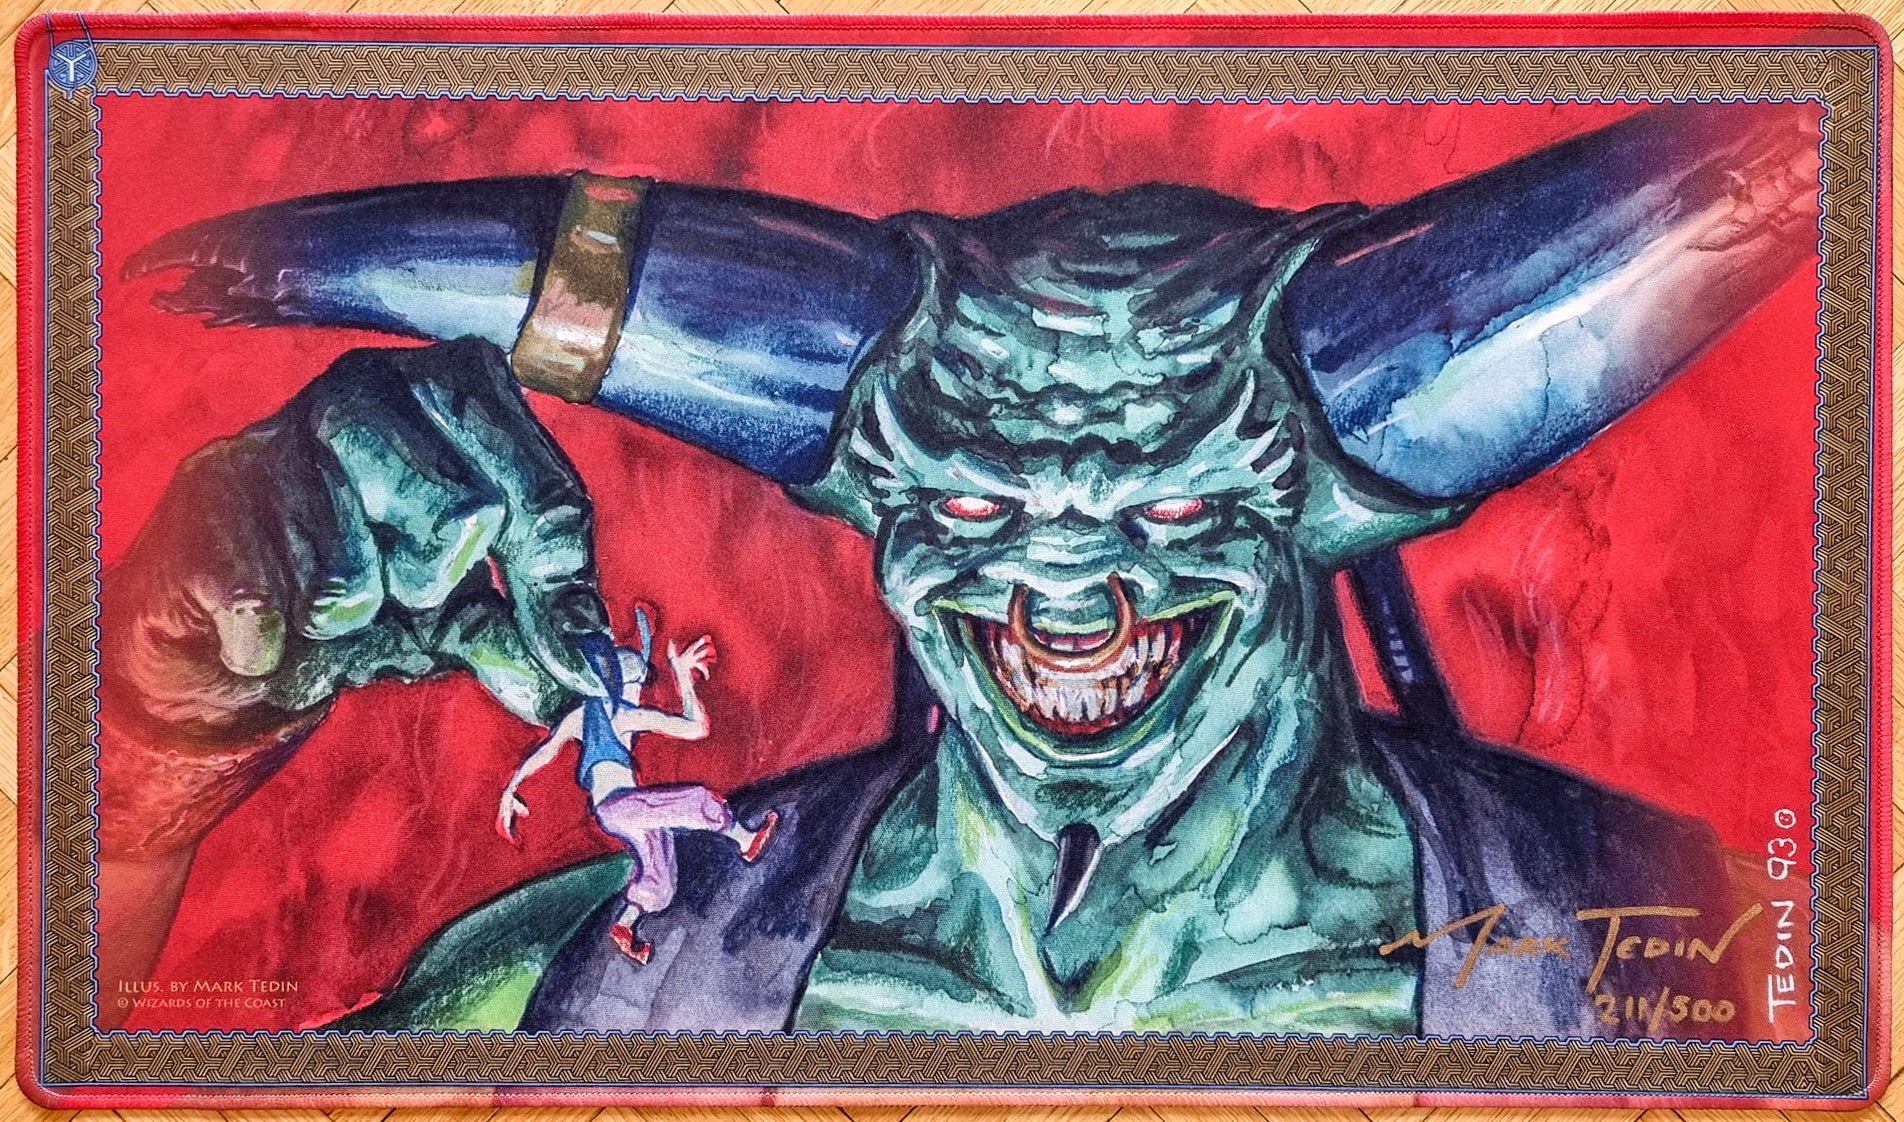 Juzam Djinn - Mark Tedin - Limited Edition [500 Copies] - Signed by the Artist - Embroidered - MTG Playmat